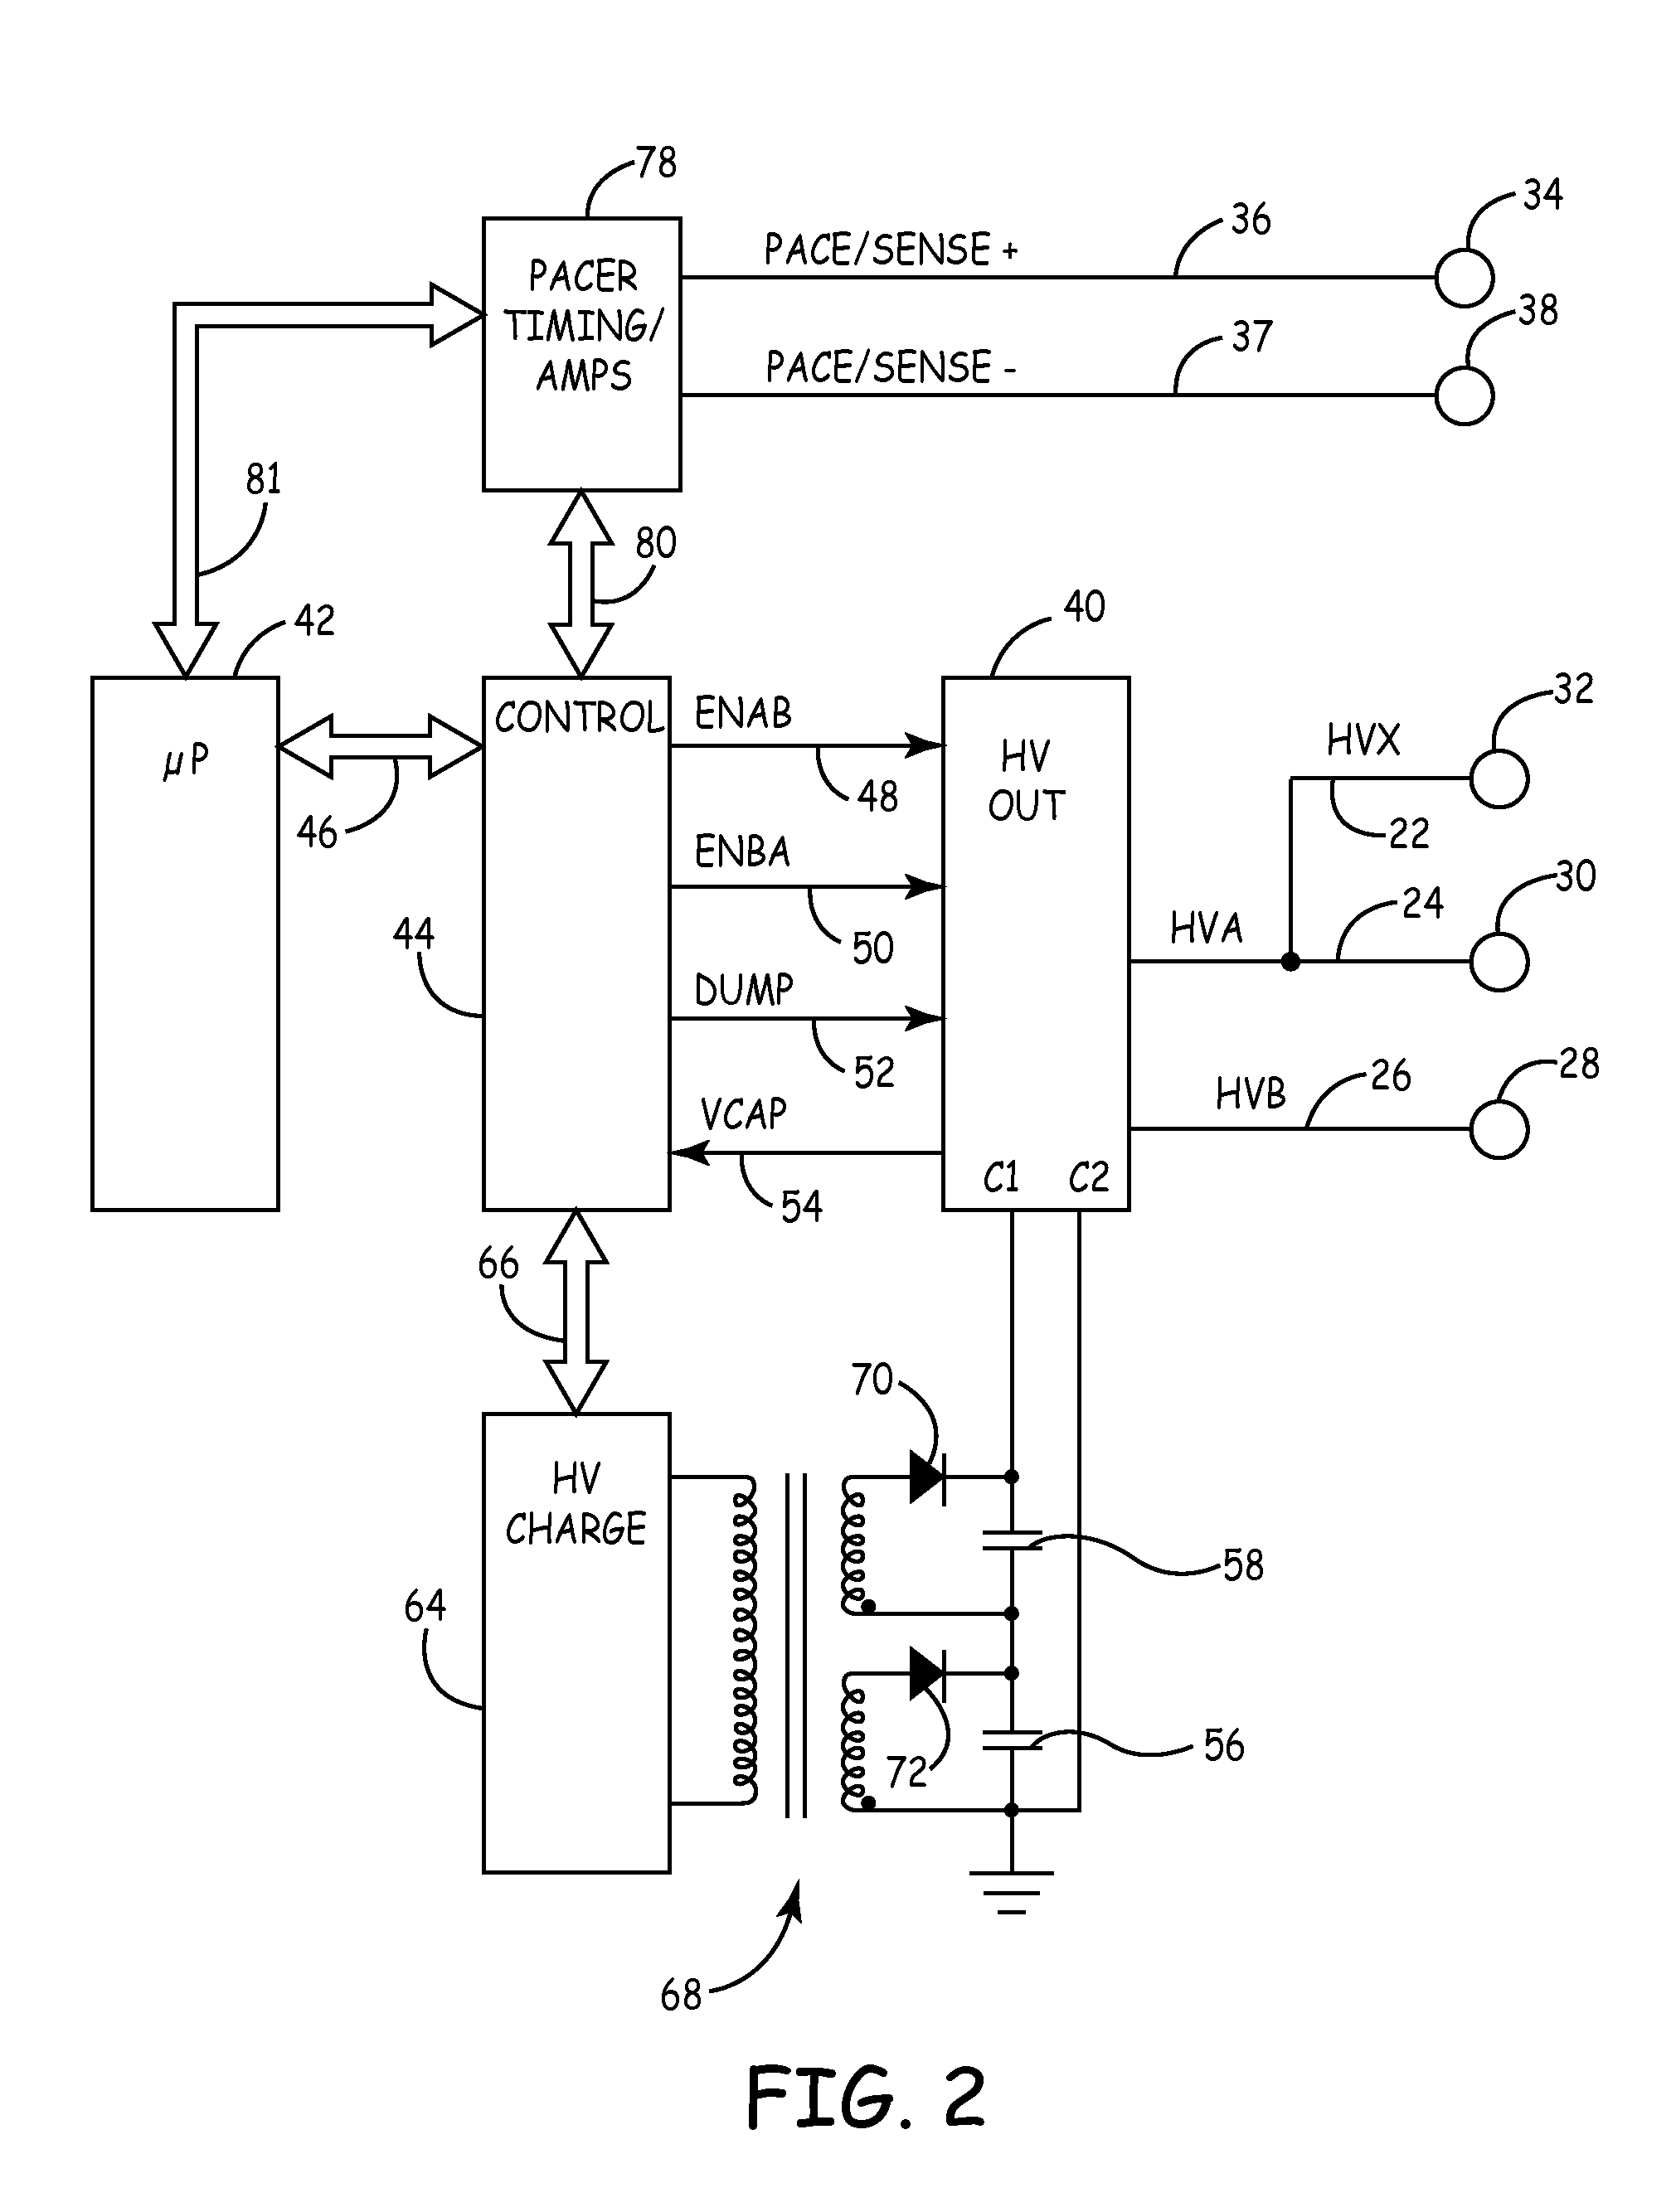 Apparatus and method for optimizing capacitor charge in a medical device